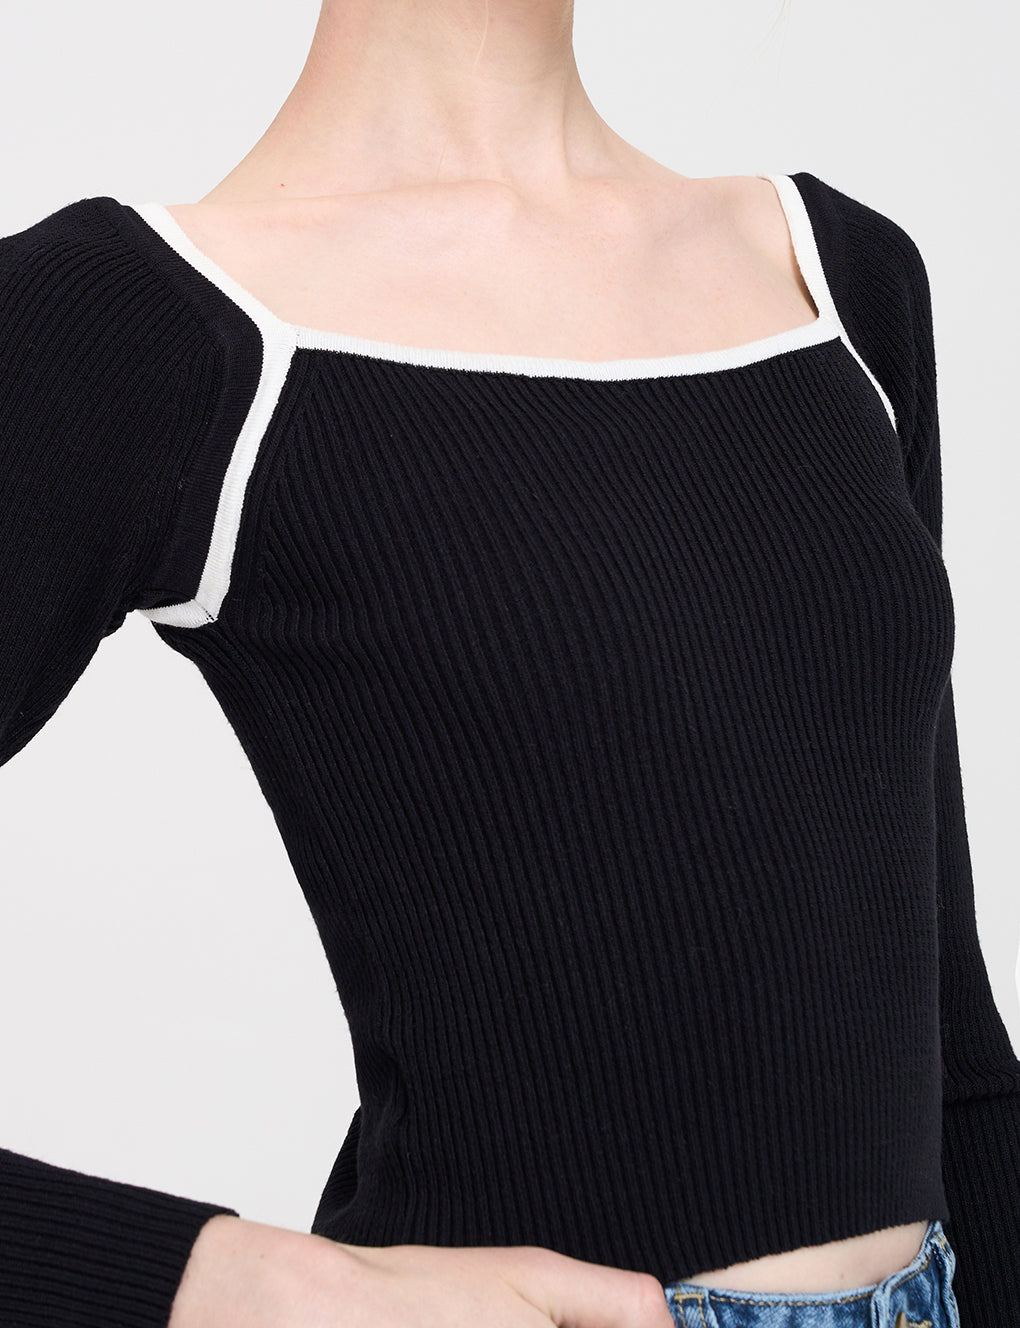 Trimmed Square Neck Stretch-knit Sweater